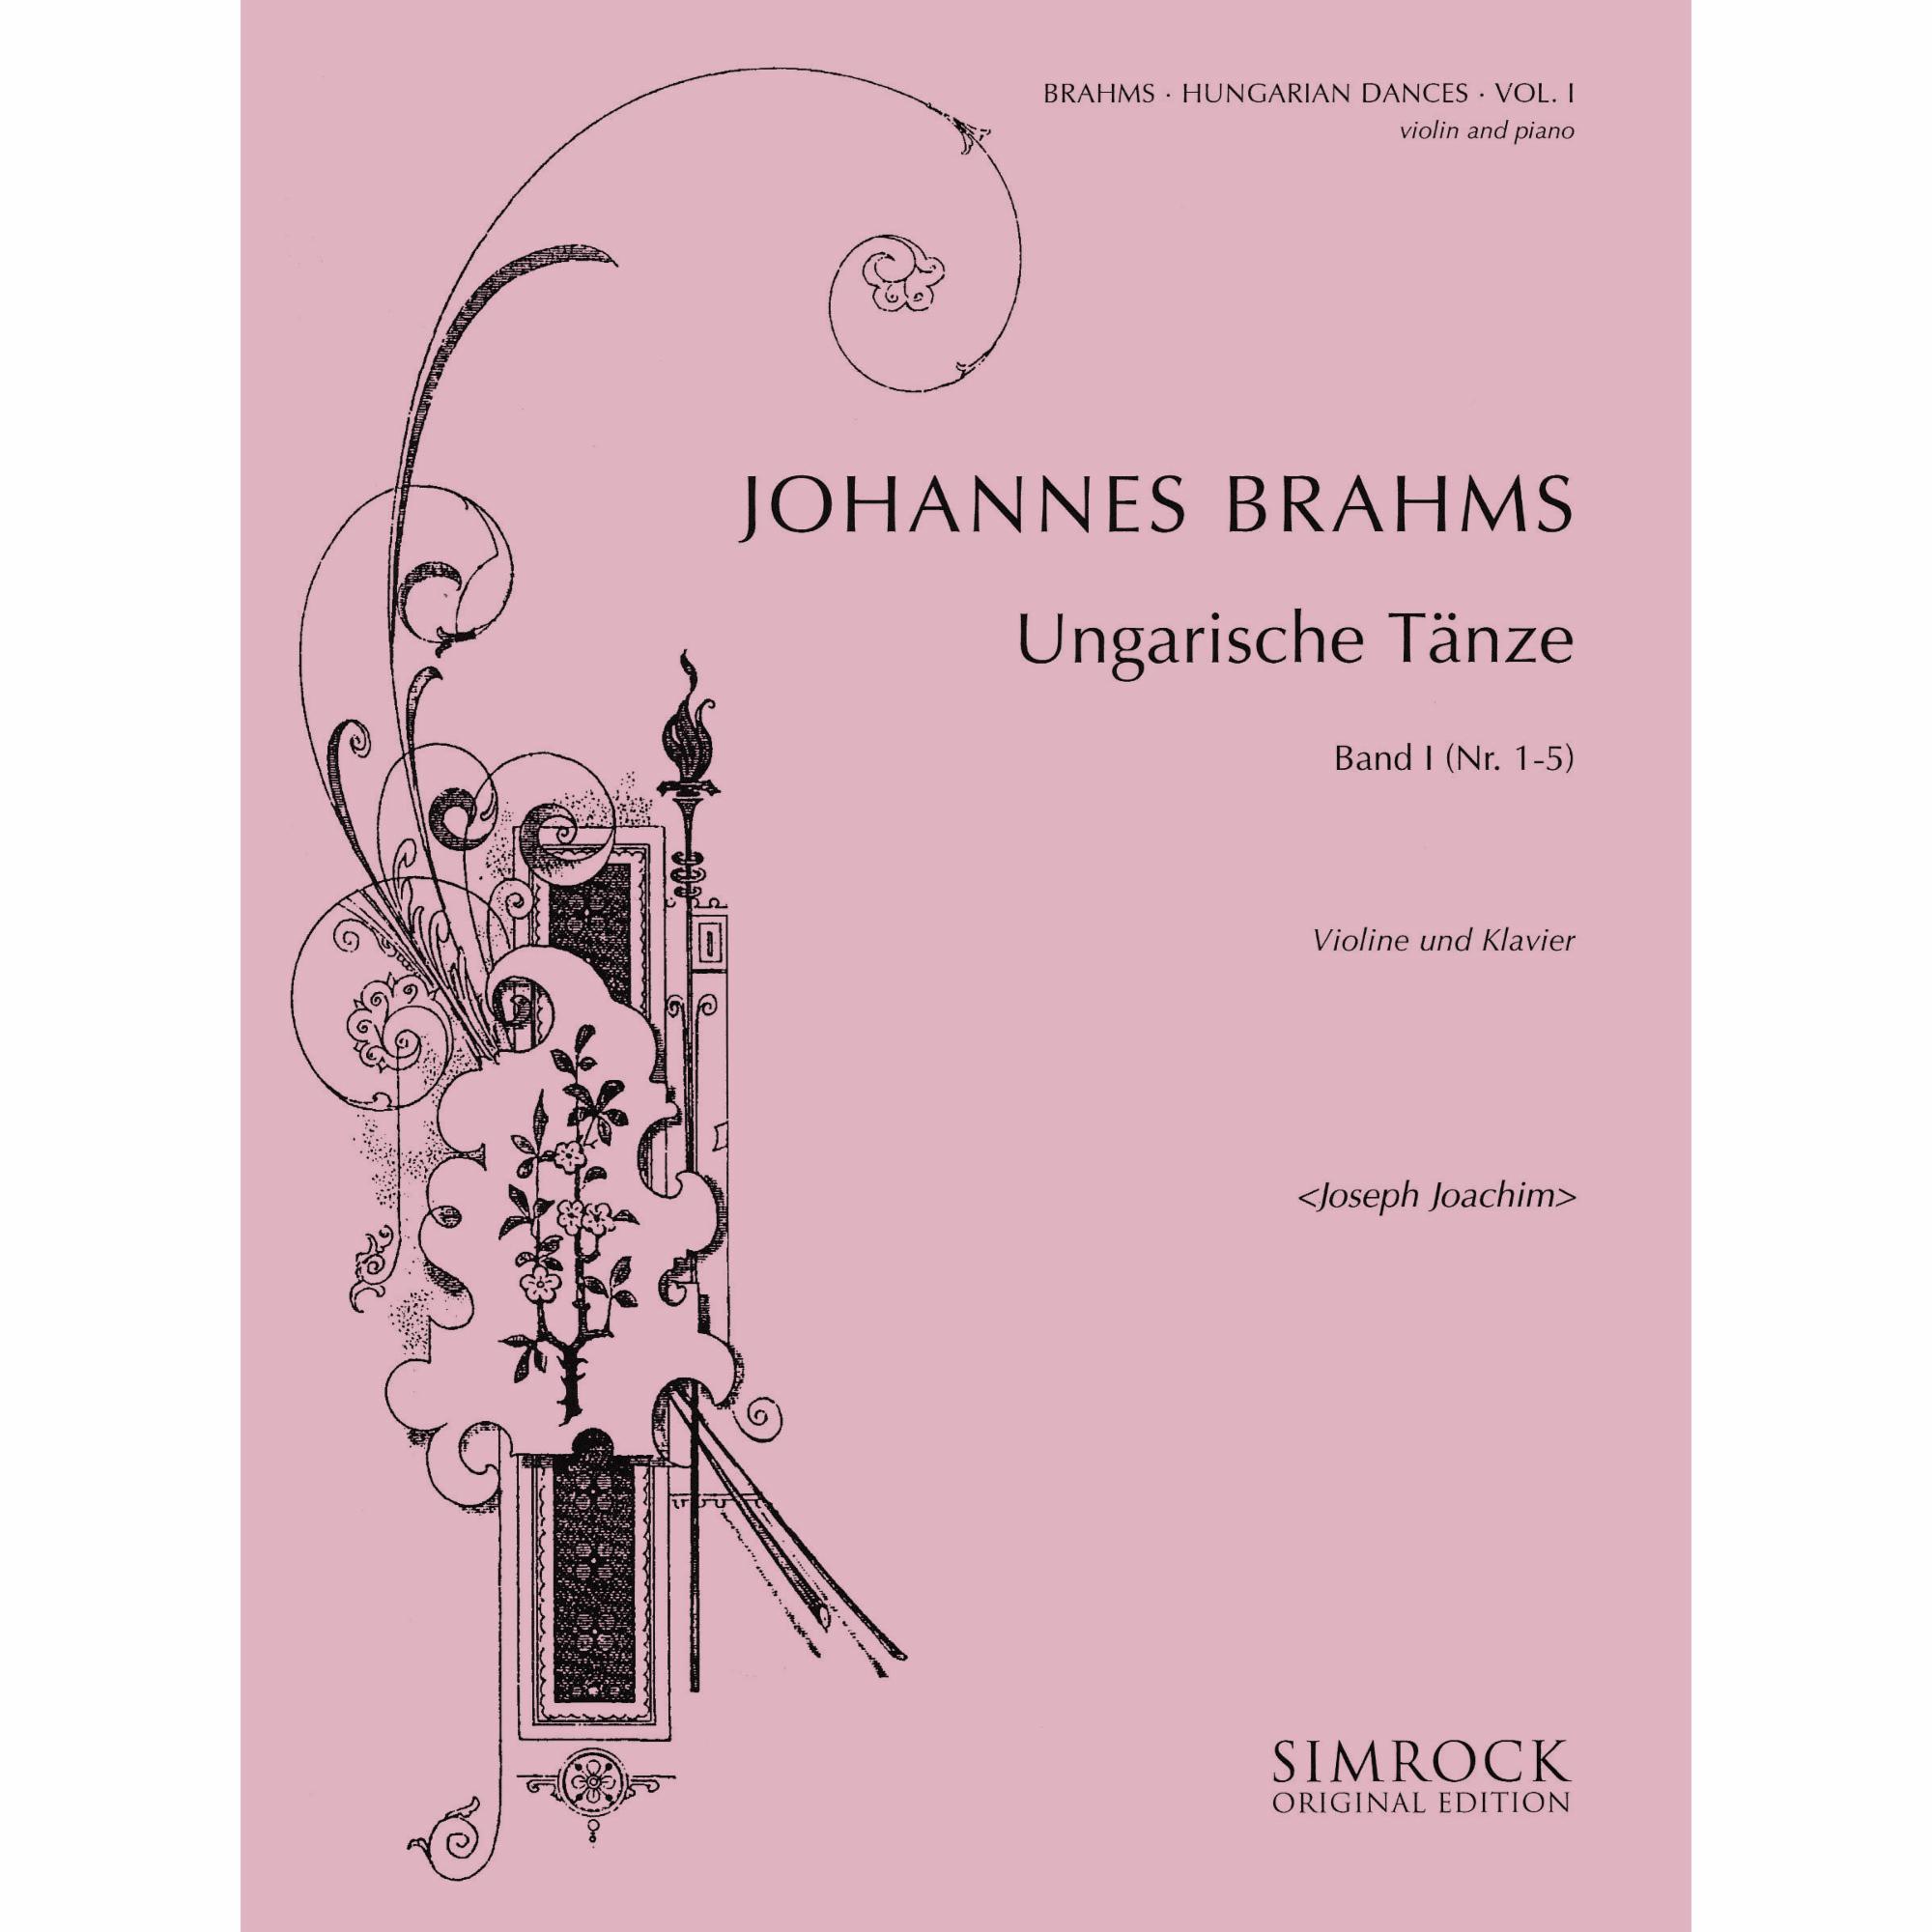 Brahms -- Hungarian Dances, Vols. I-IV for Violin and Piano